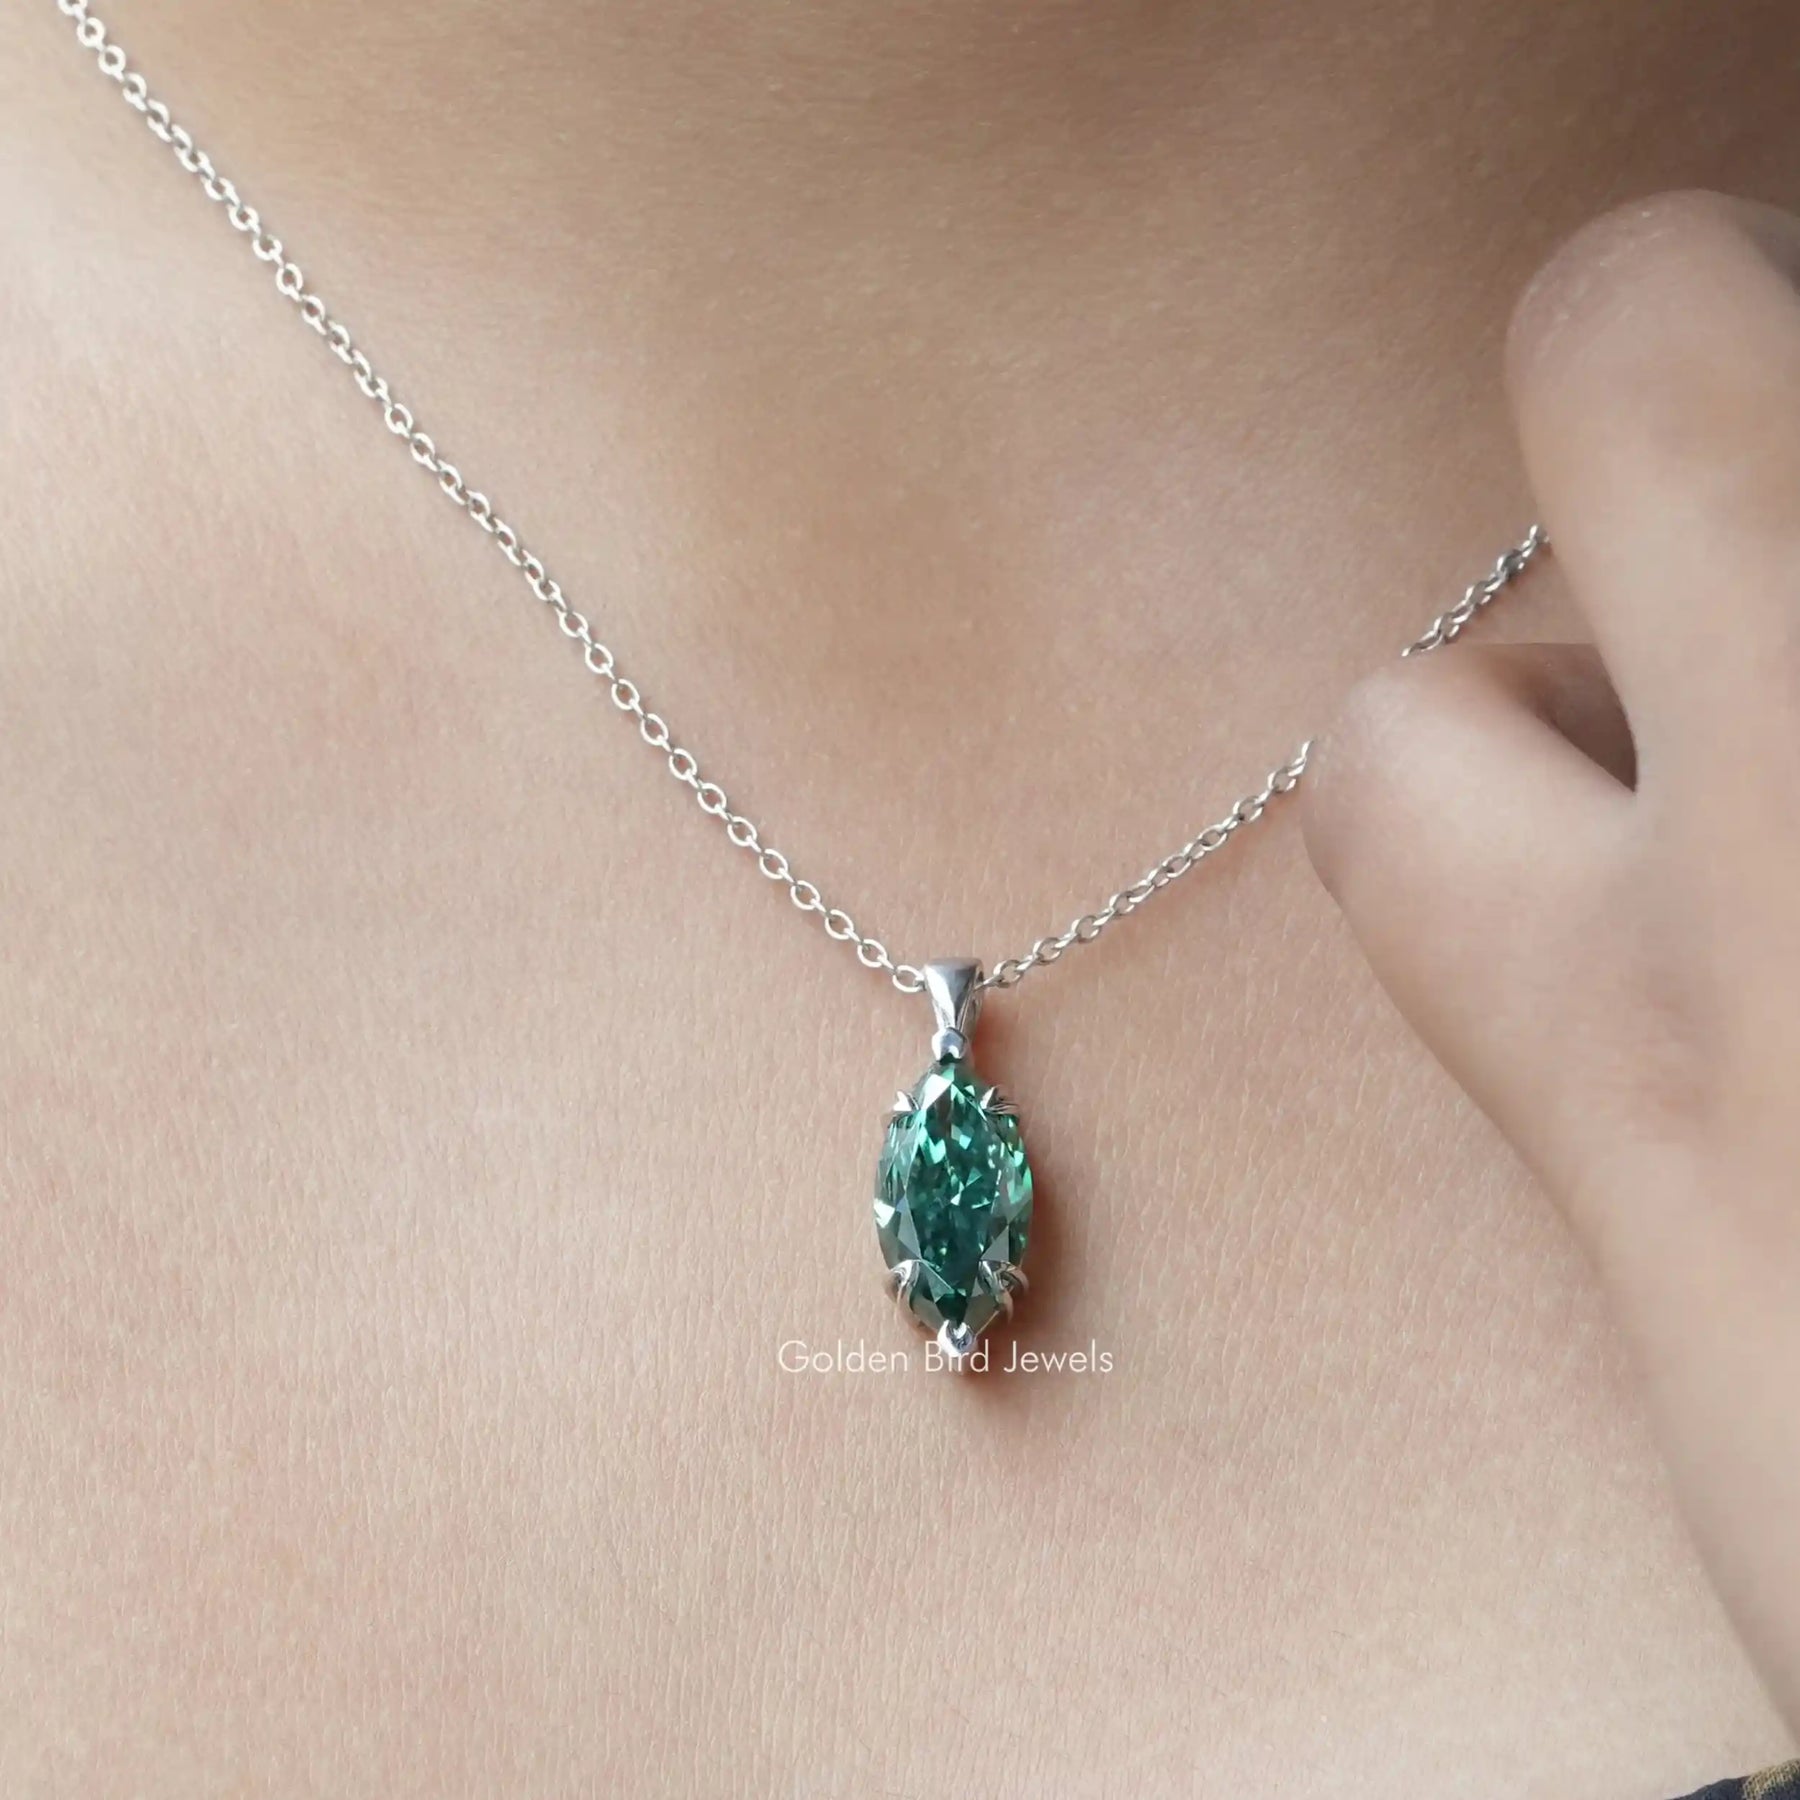 [White gold green marquise cut solitaire pendant made of vs clarity]-[Golden Bird Jewels]